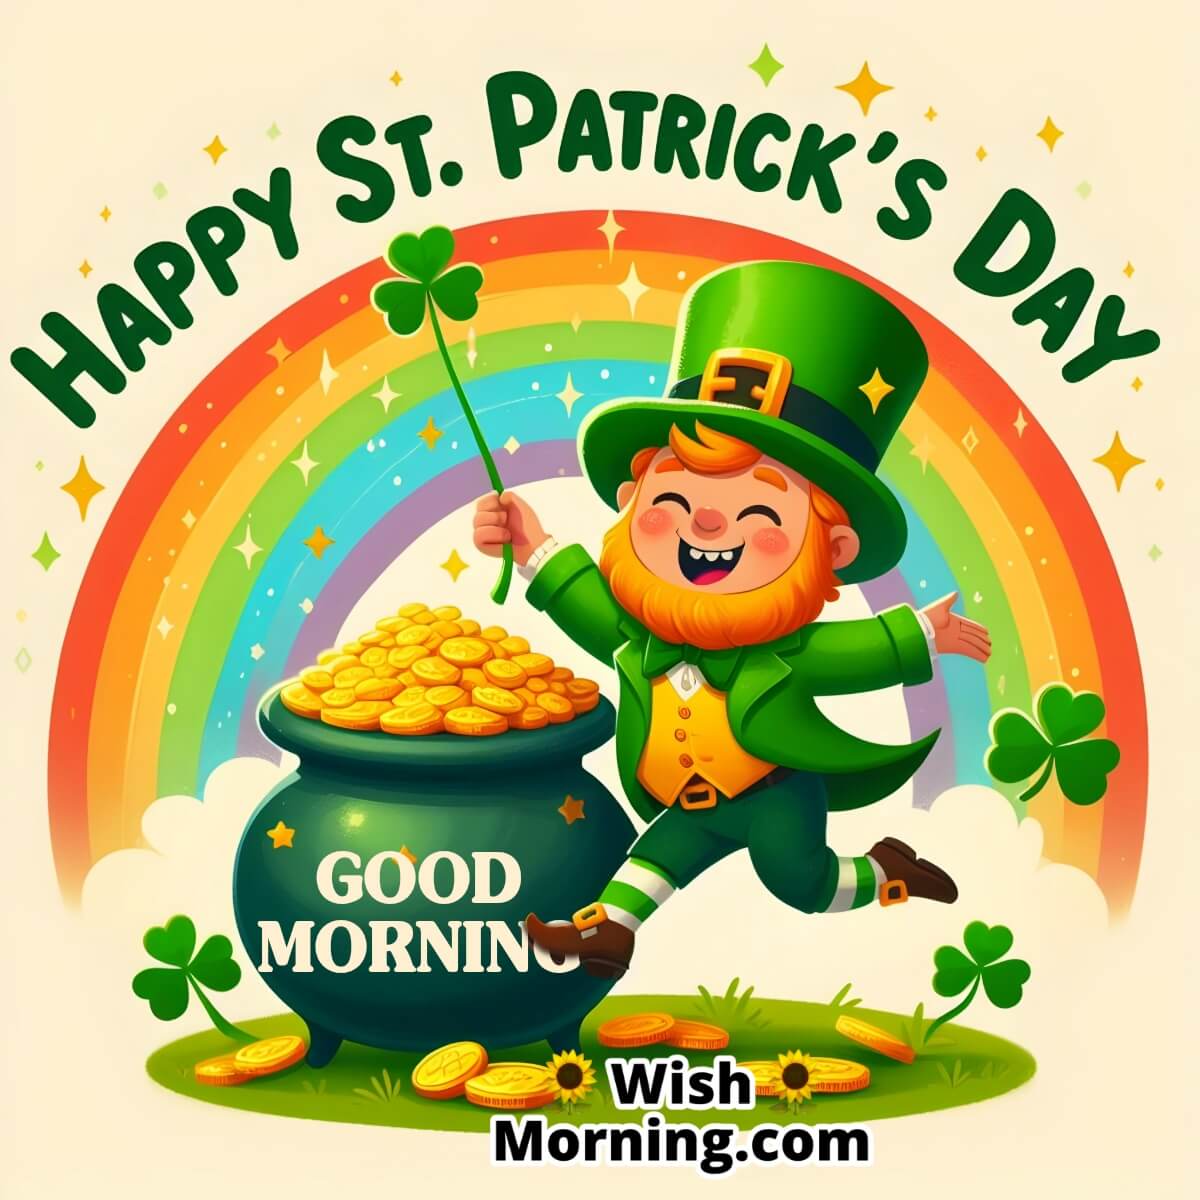 Good Morning St. Patrick's Day Pot Of Gold